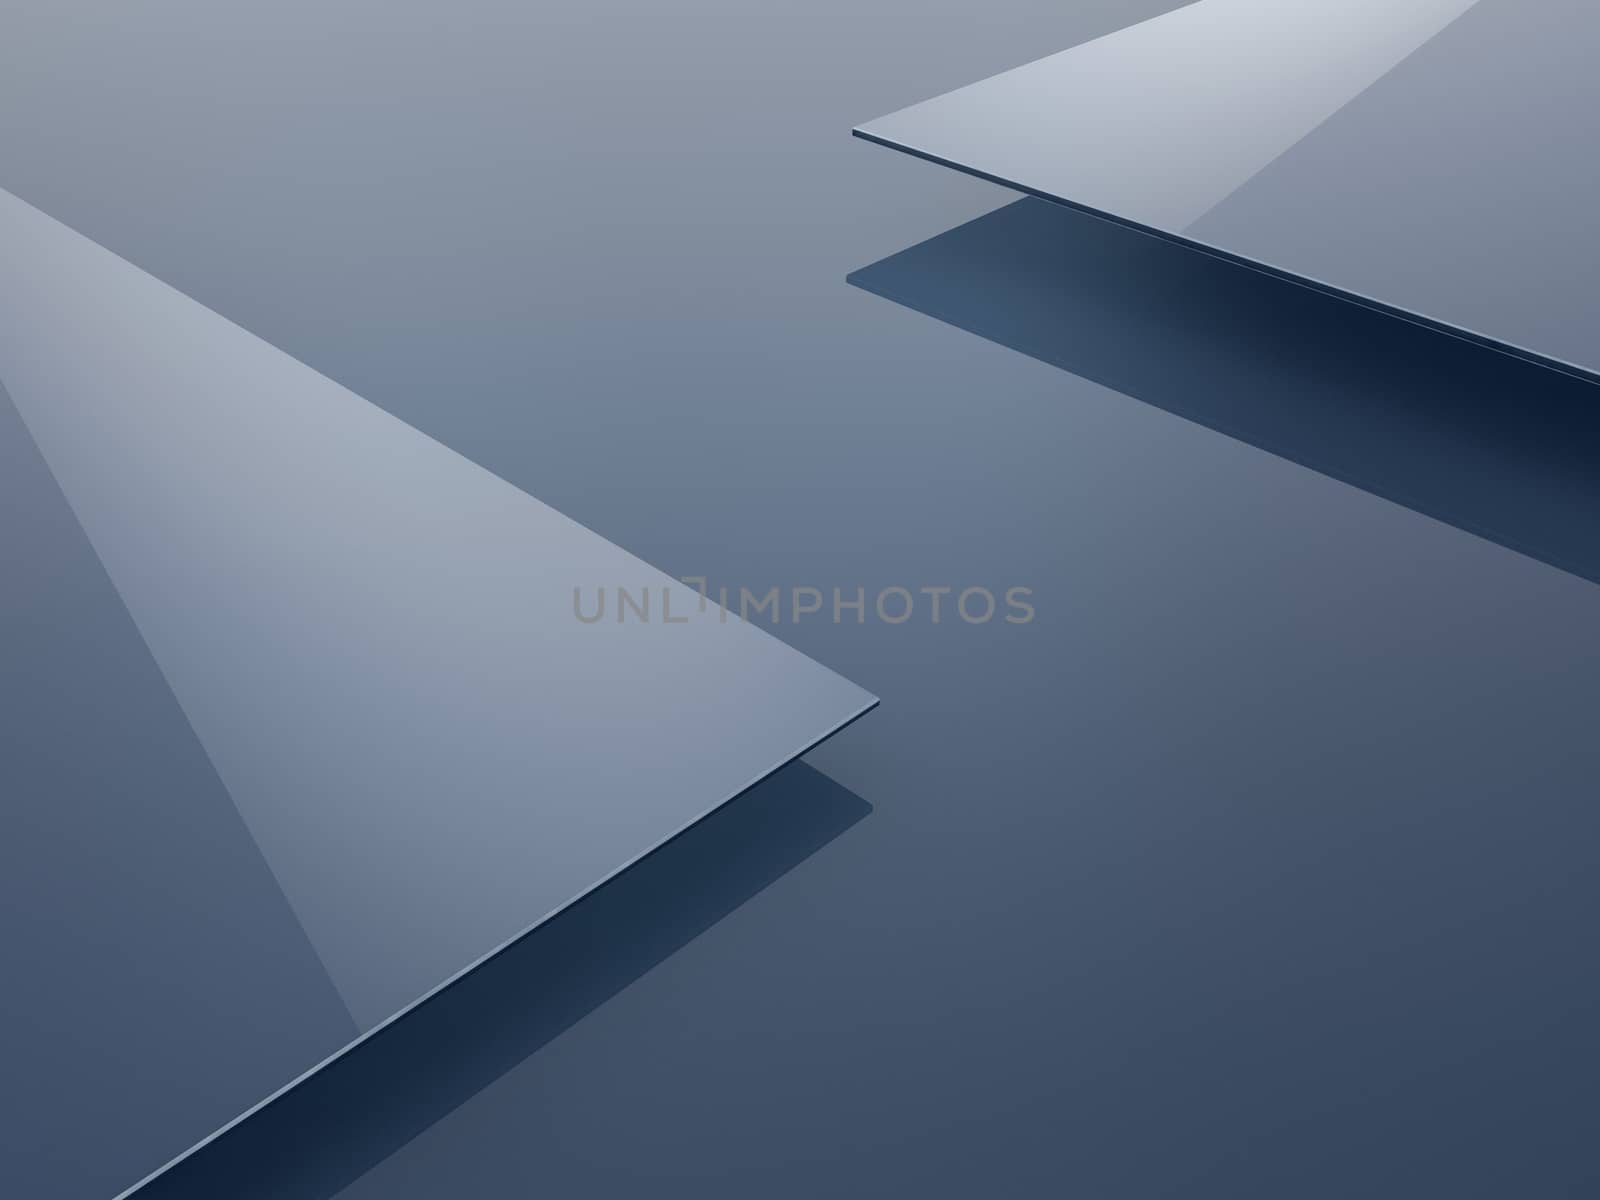 Abstract polygonal background, geometric 3D illustration. Creative design template by tussik